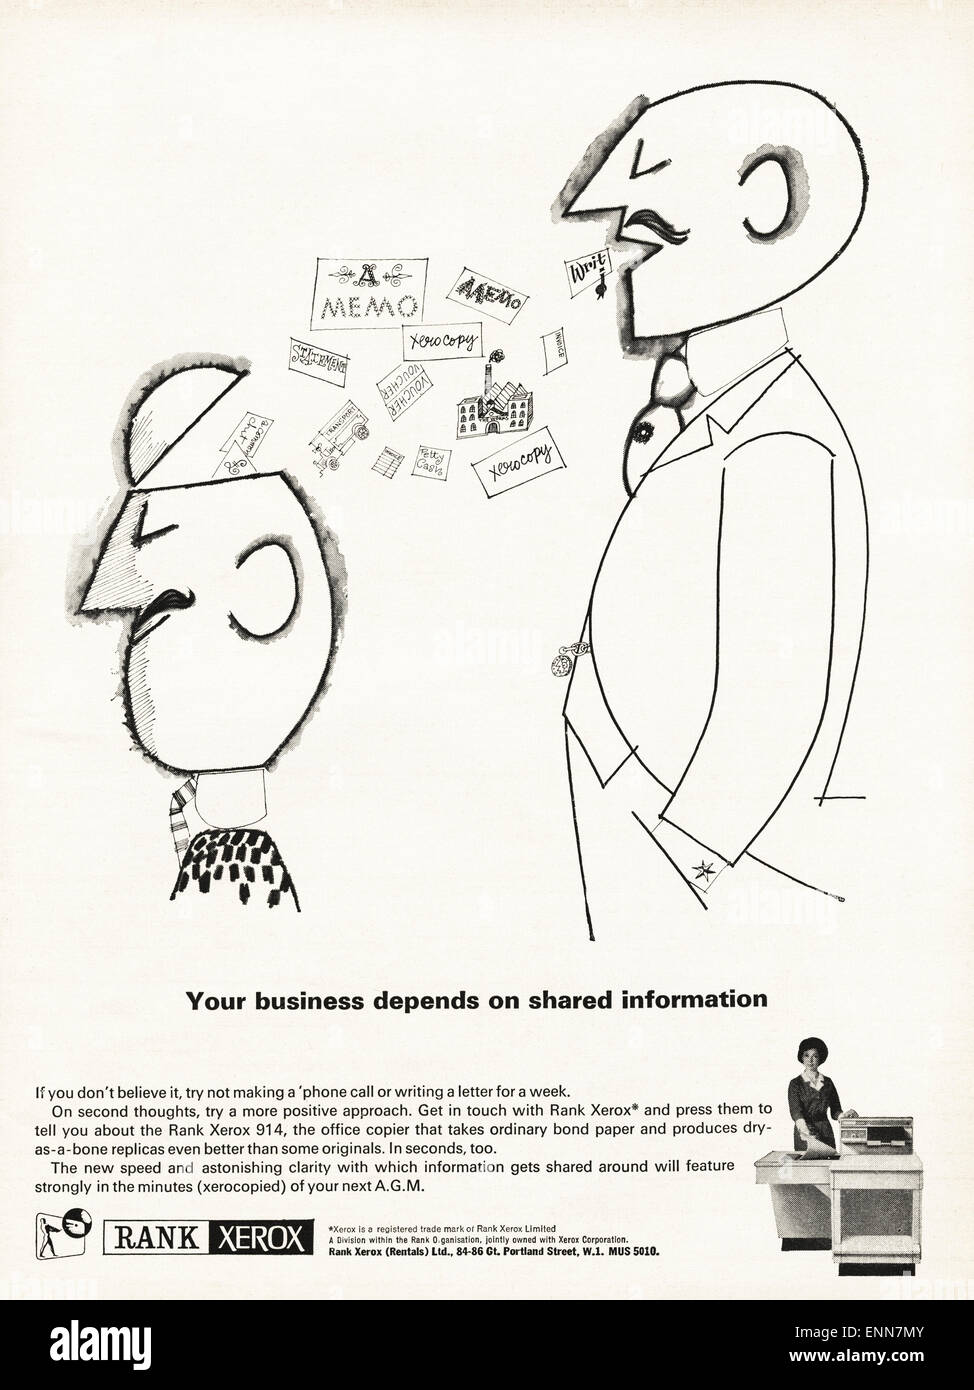 Vintage advert in 1960s magazine dated 1964 for RANK XEROX copiers Stock Photo